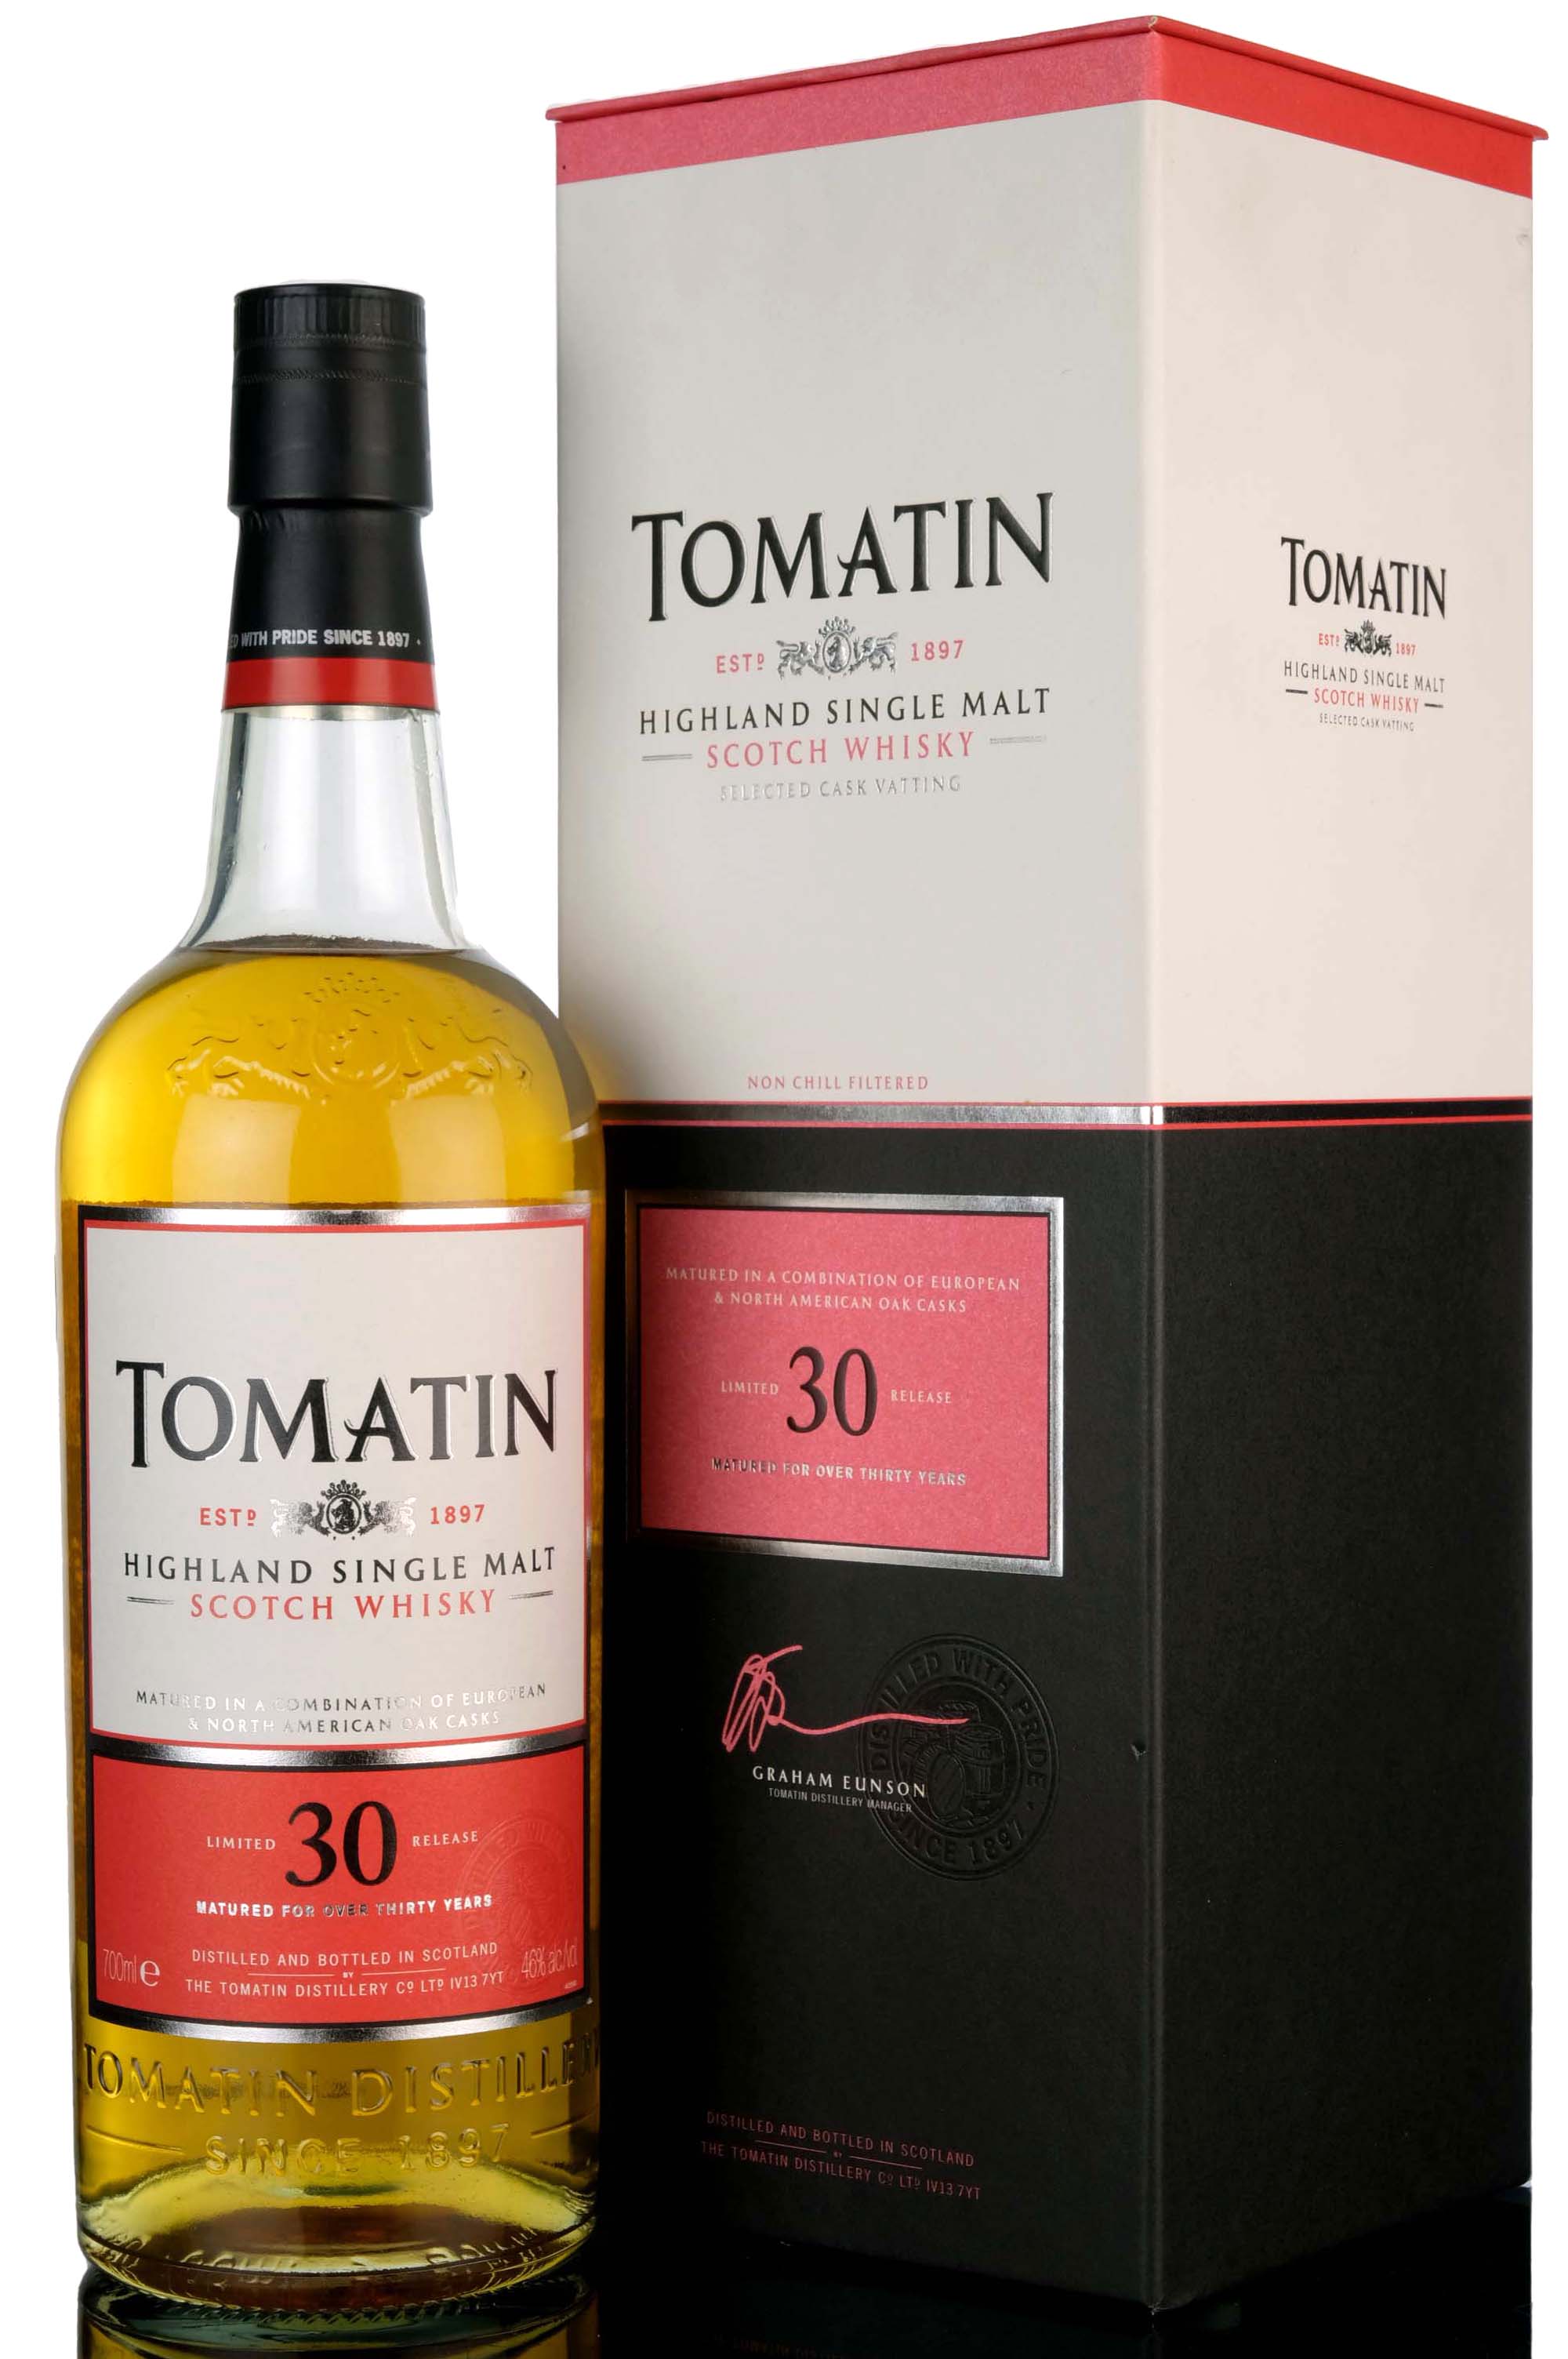 Tomatin 30 Year Old - 2012 Release